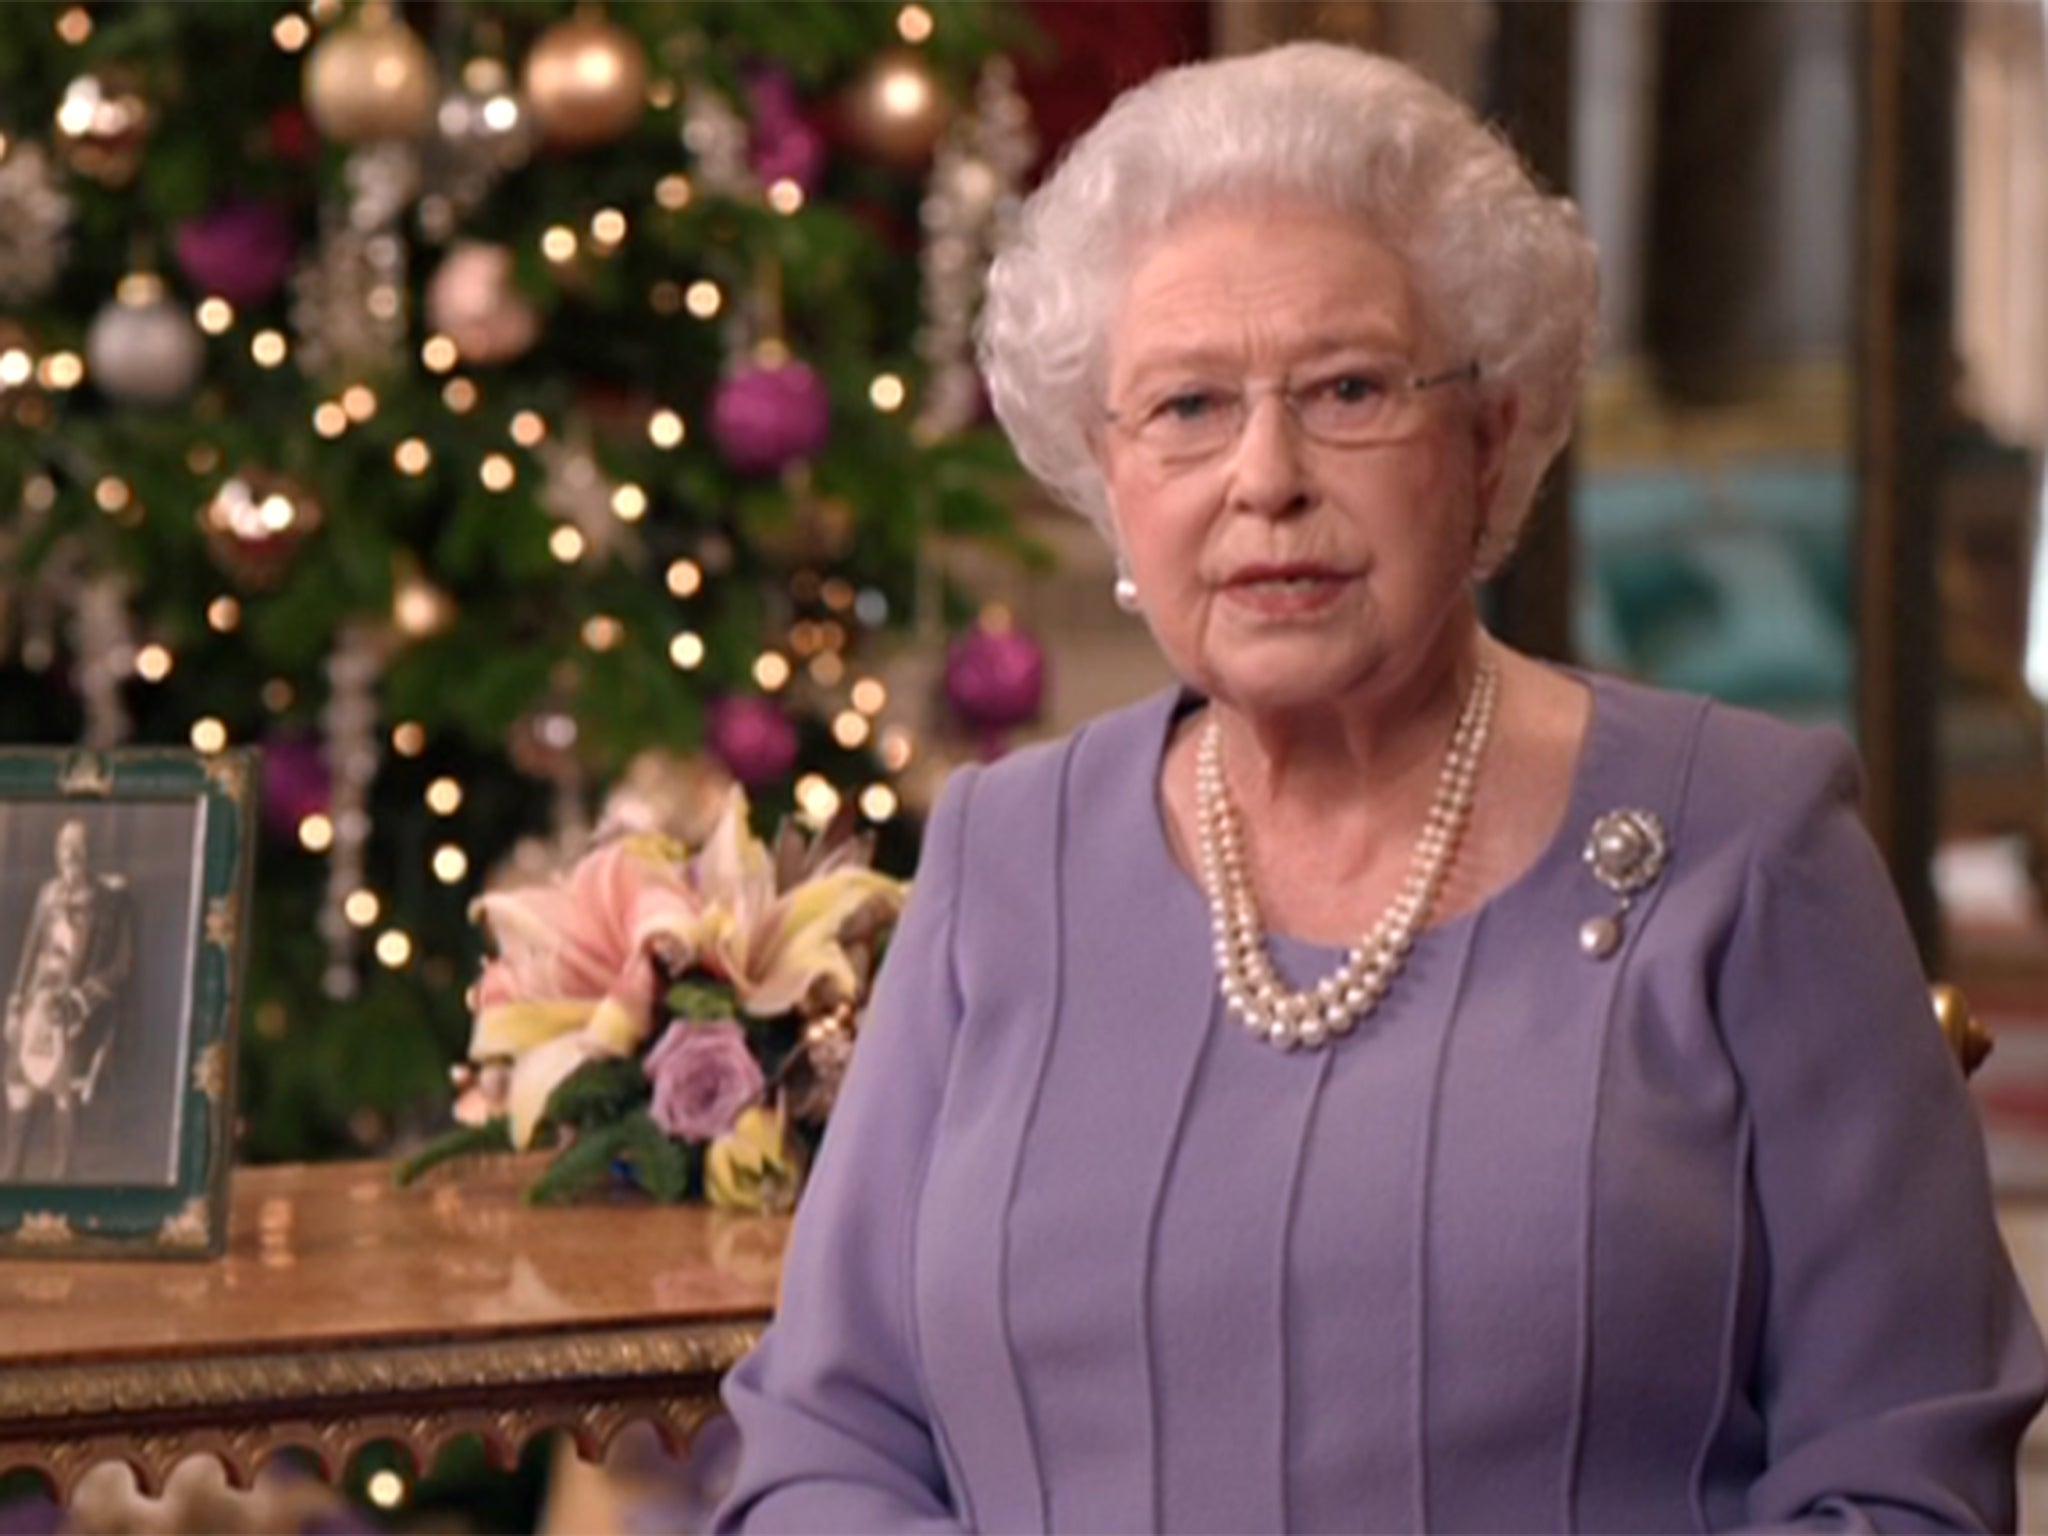 The Queen delivers her Christmas message